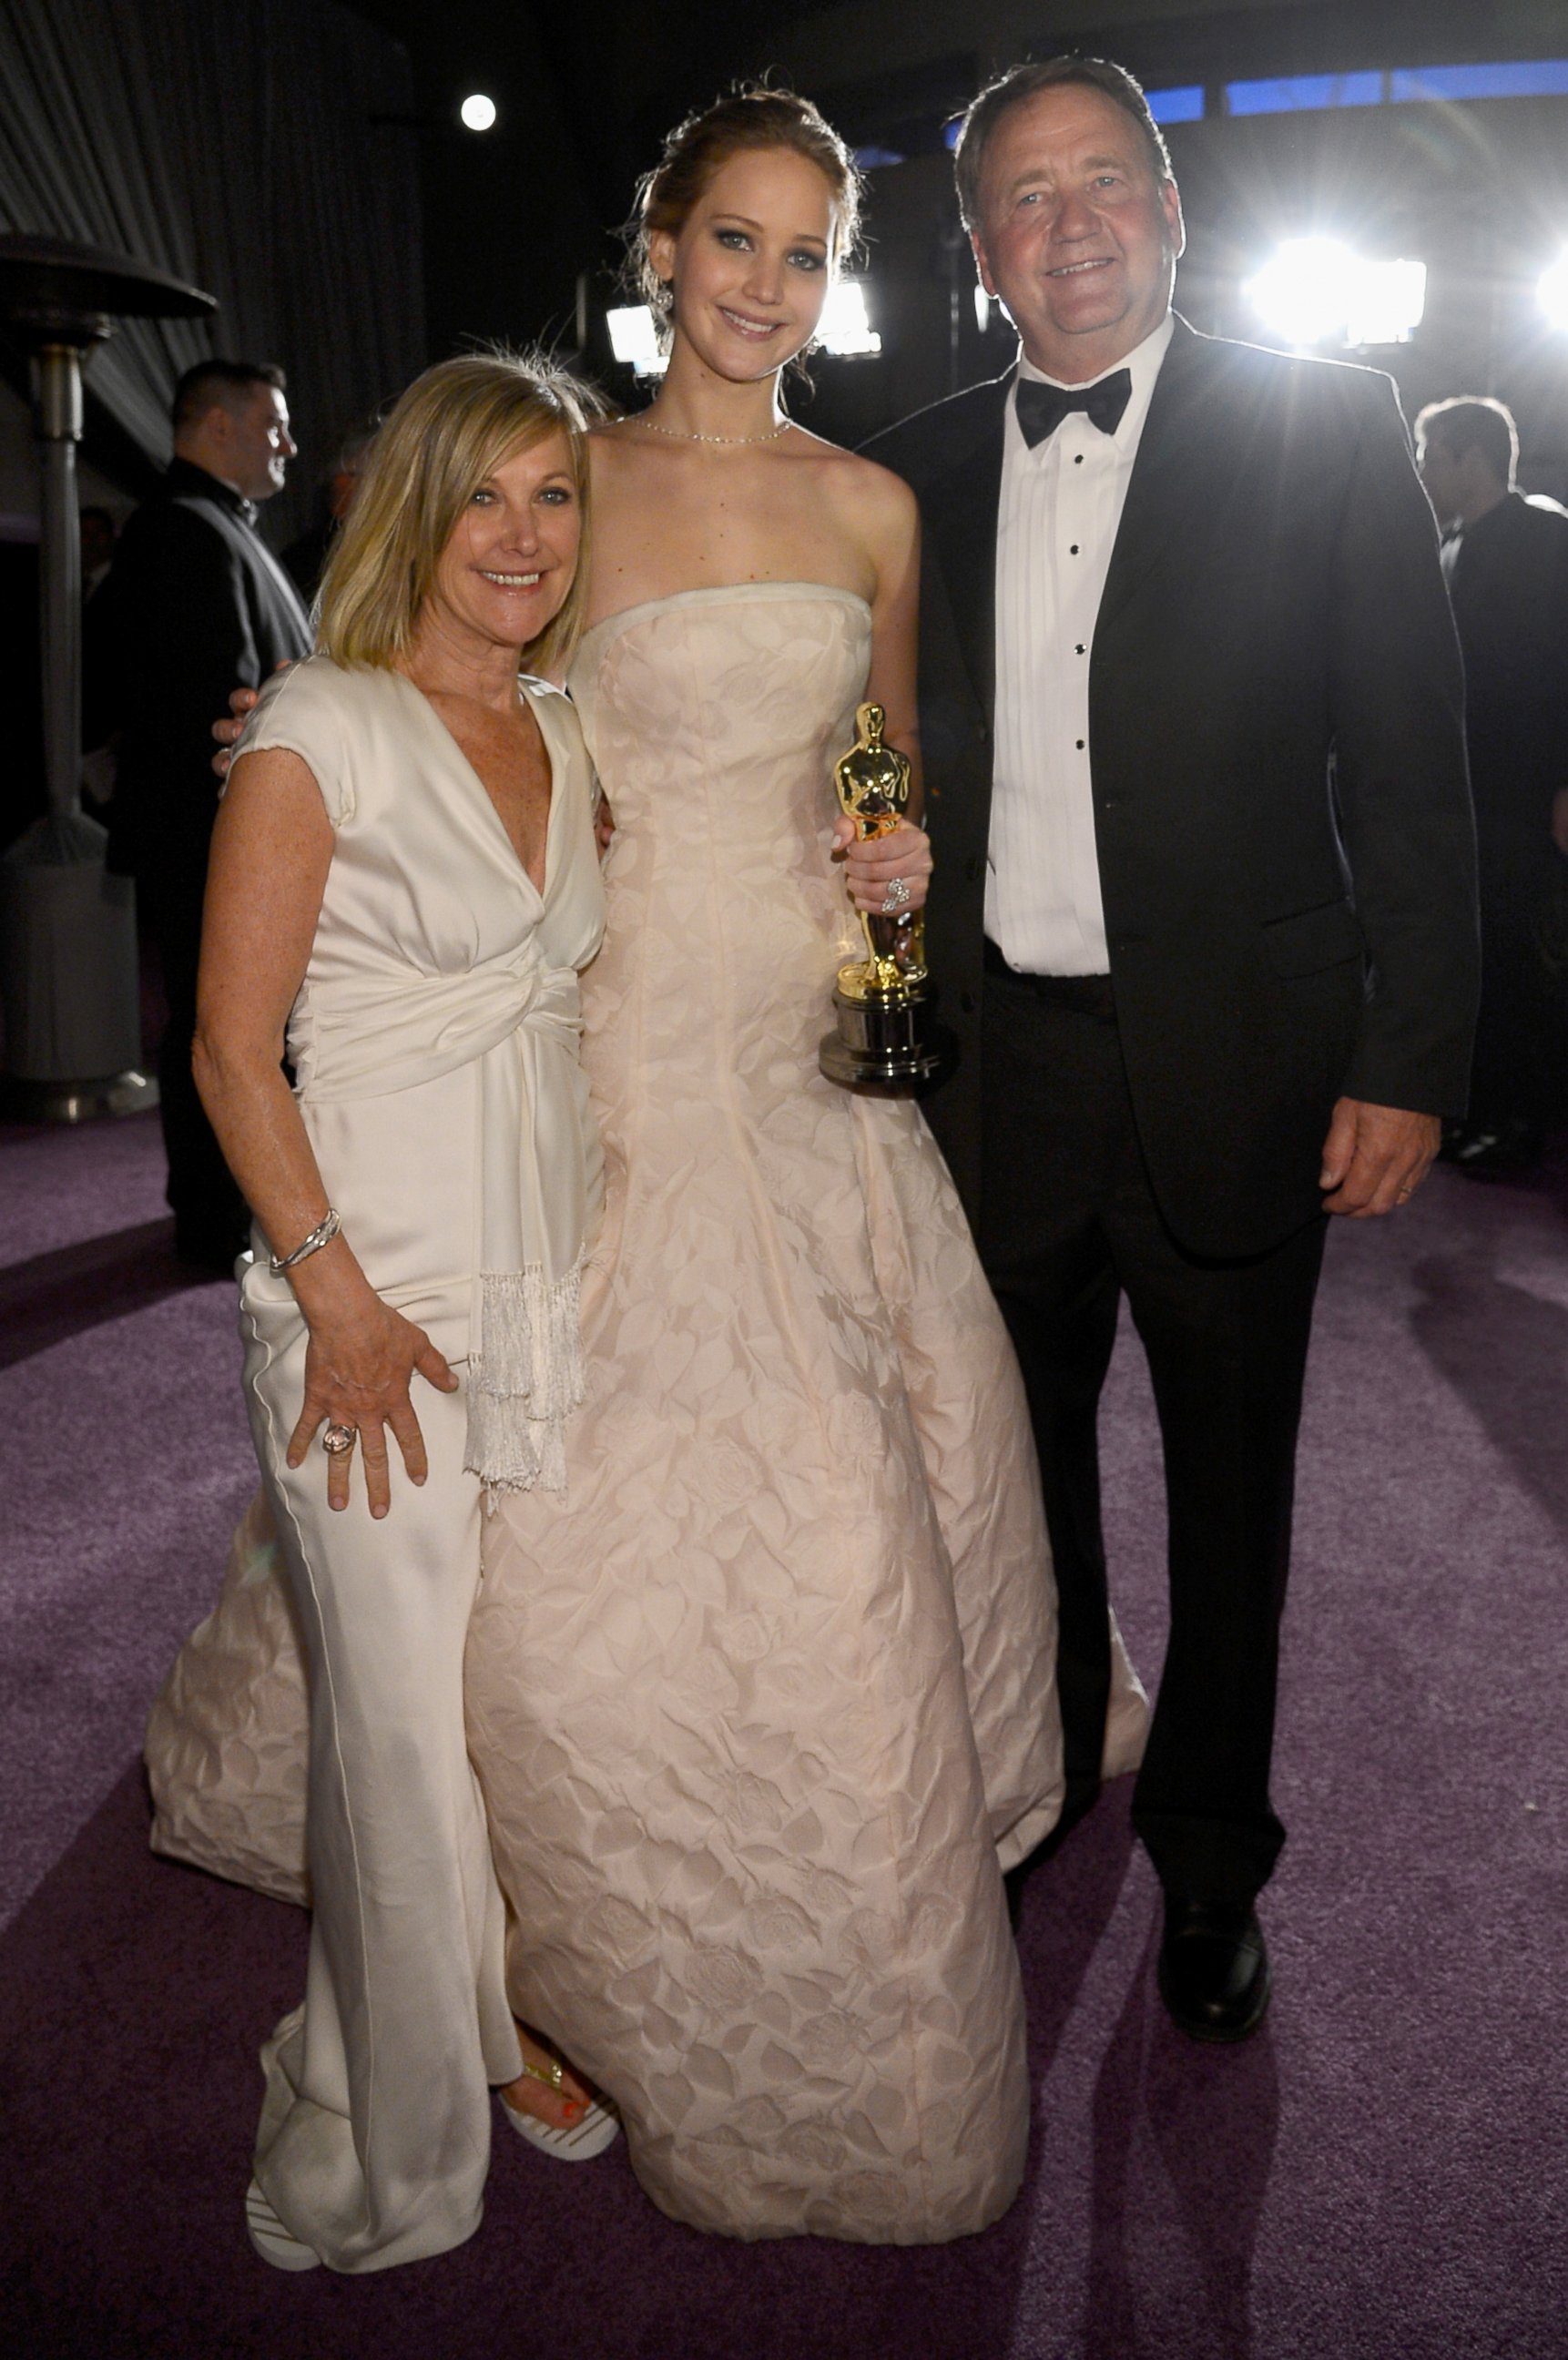 PHOTO: Jennifer Lawrence and her parents Karen Lawrence and Gary Lawrence at the Oscars Governors Ball, Feb. 24, 2013, in Hollywood, Calif.